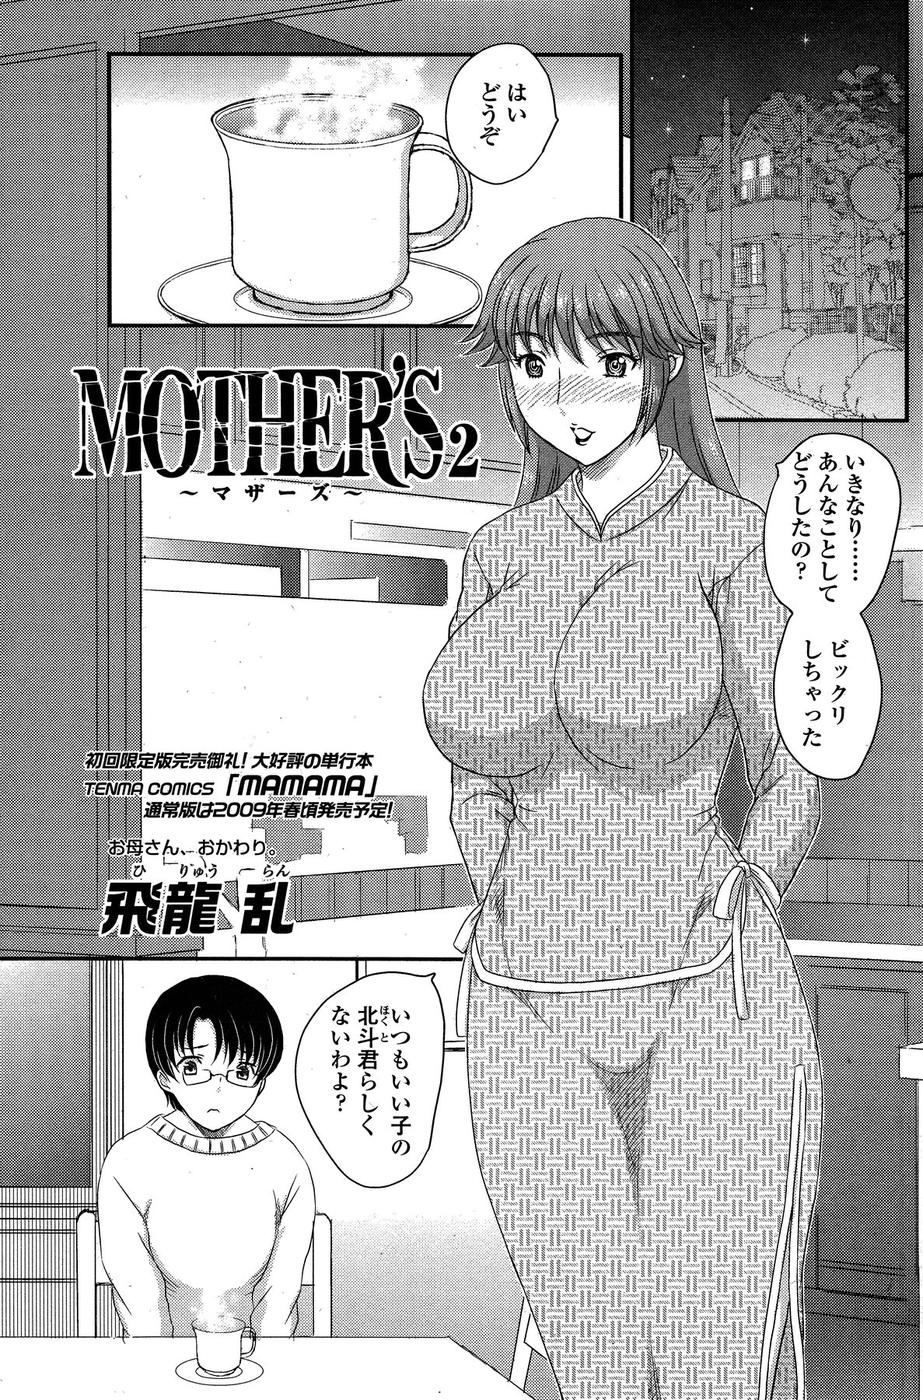 [Hiryuu Ran] MOTHER'S Ch. 1-9 page 18 full